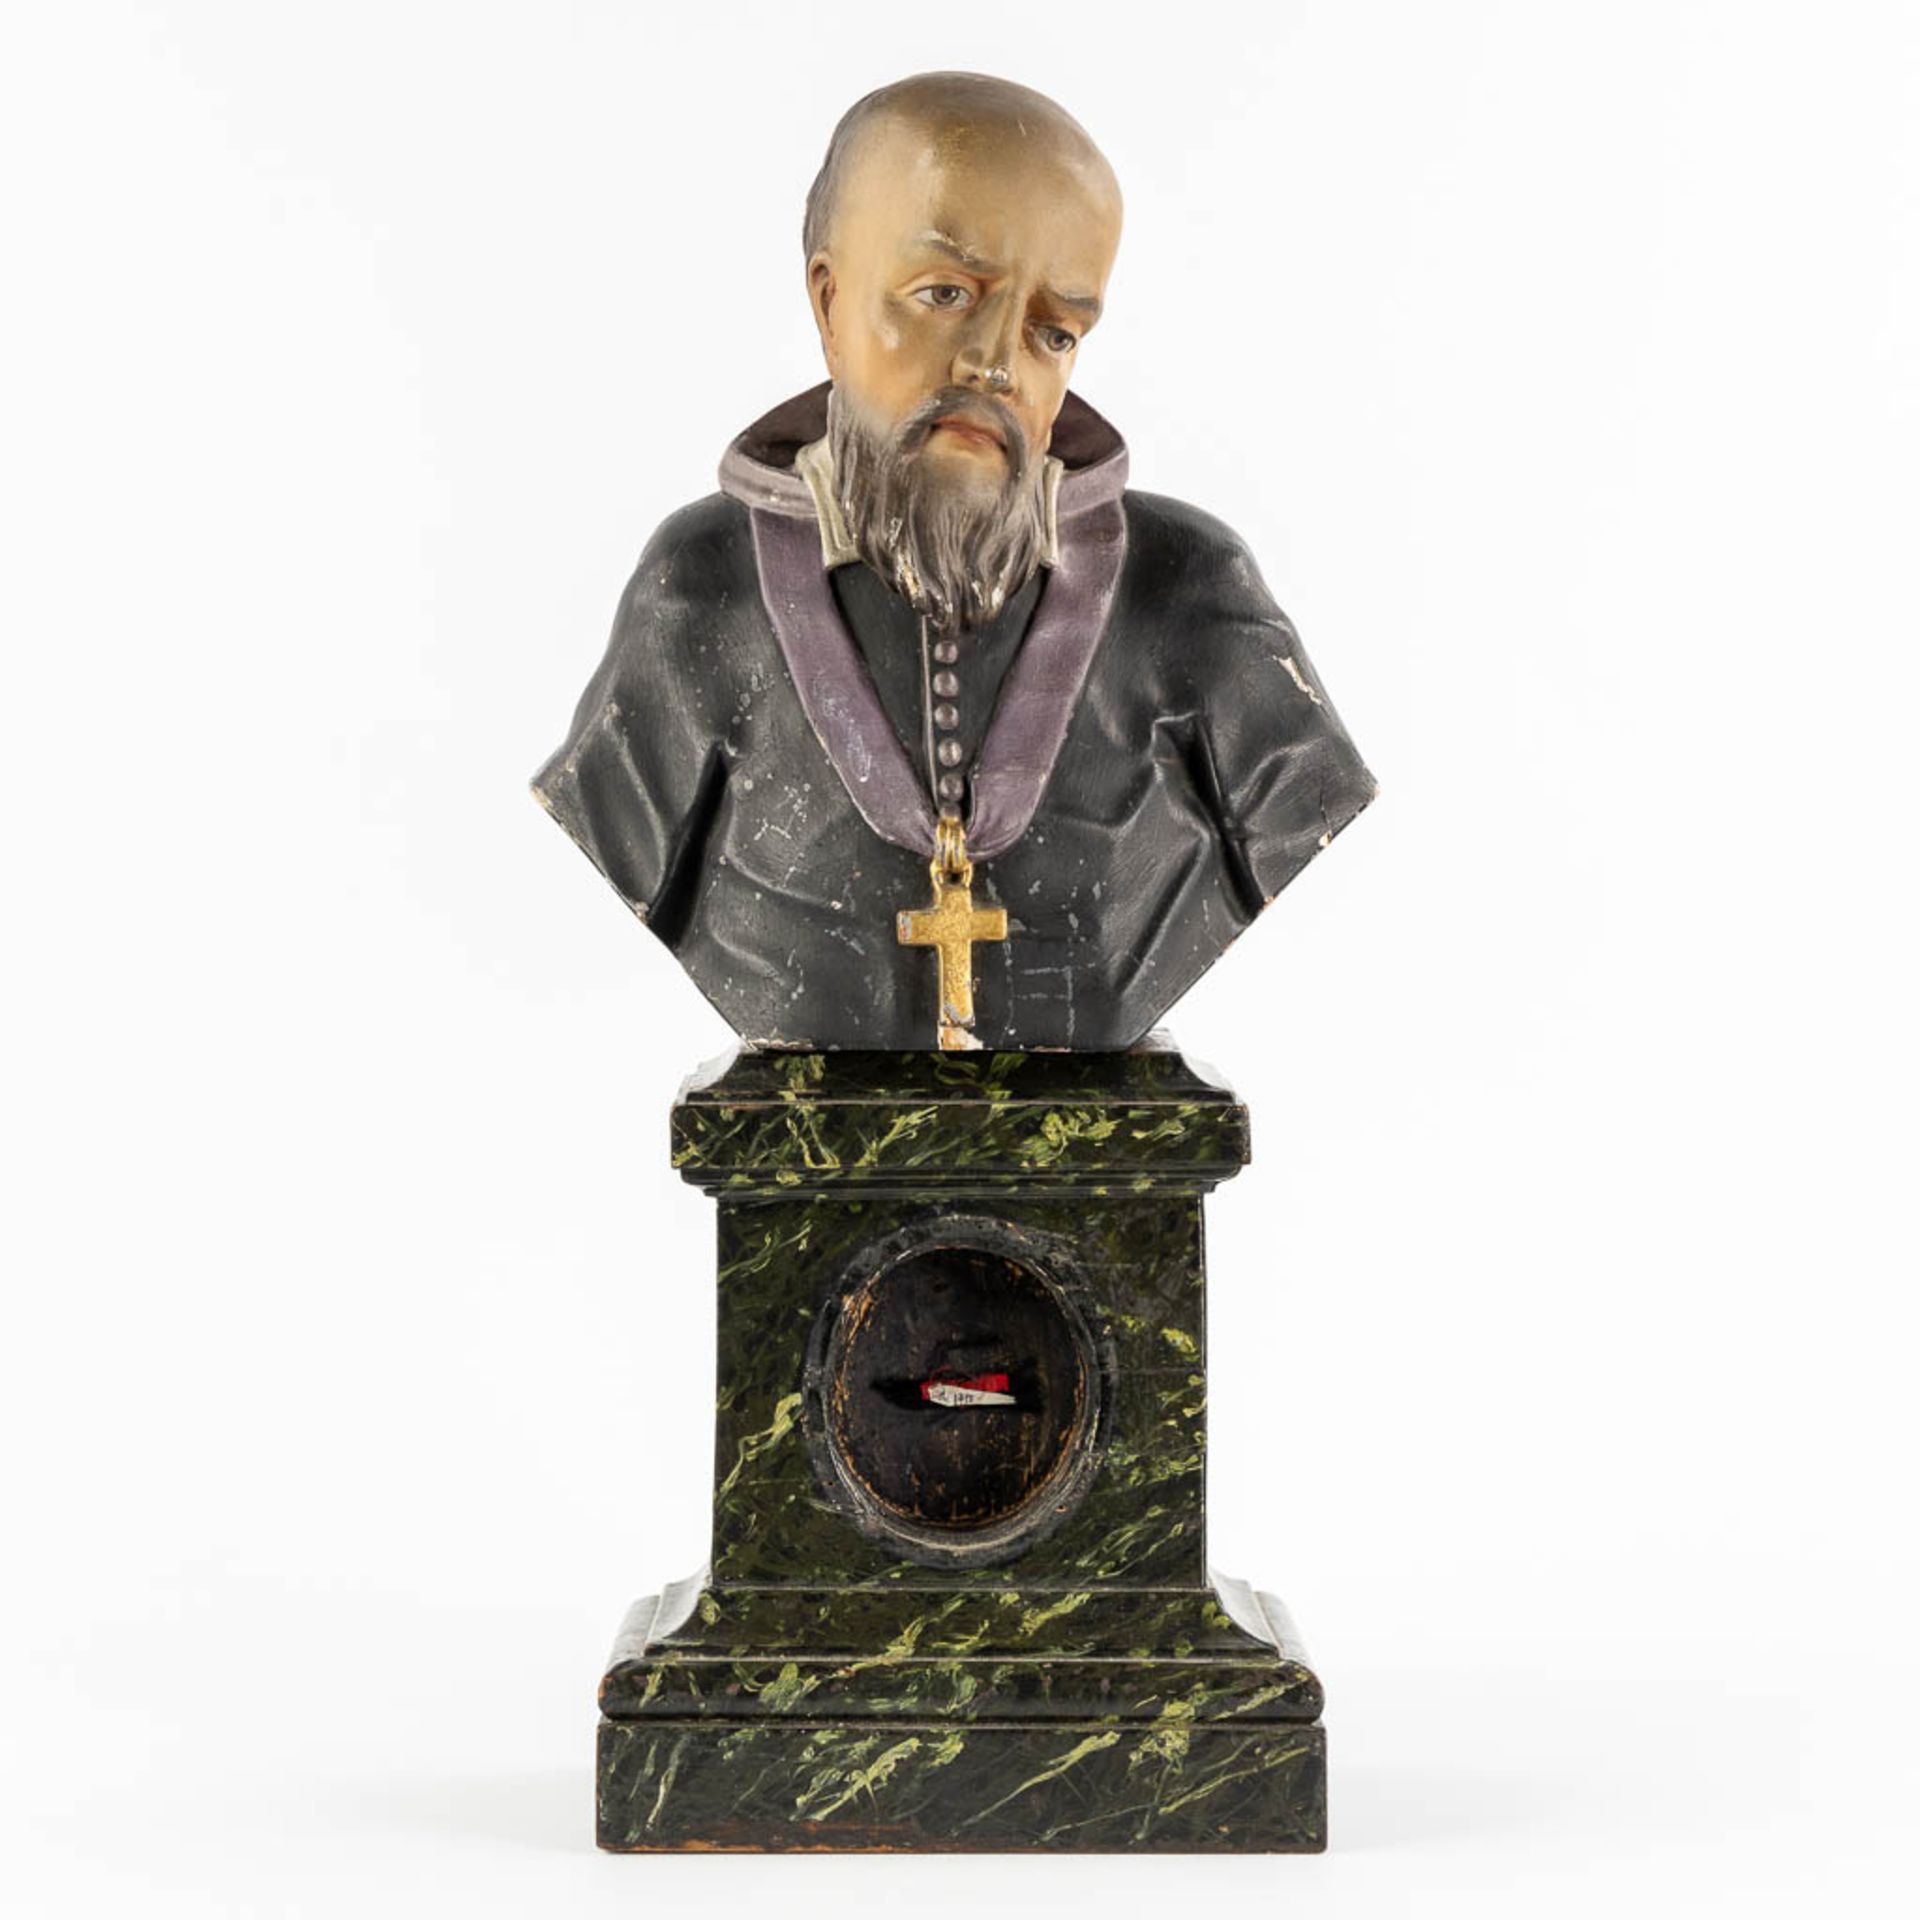 An antique reliquary buste of a saint. Sculptured and patinated wood. 19th C. (L:14 x W:25 x H:50 cm